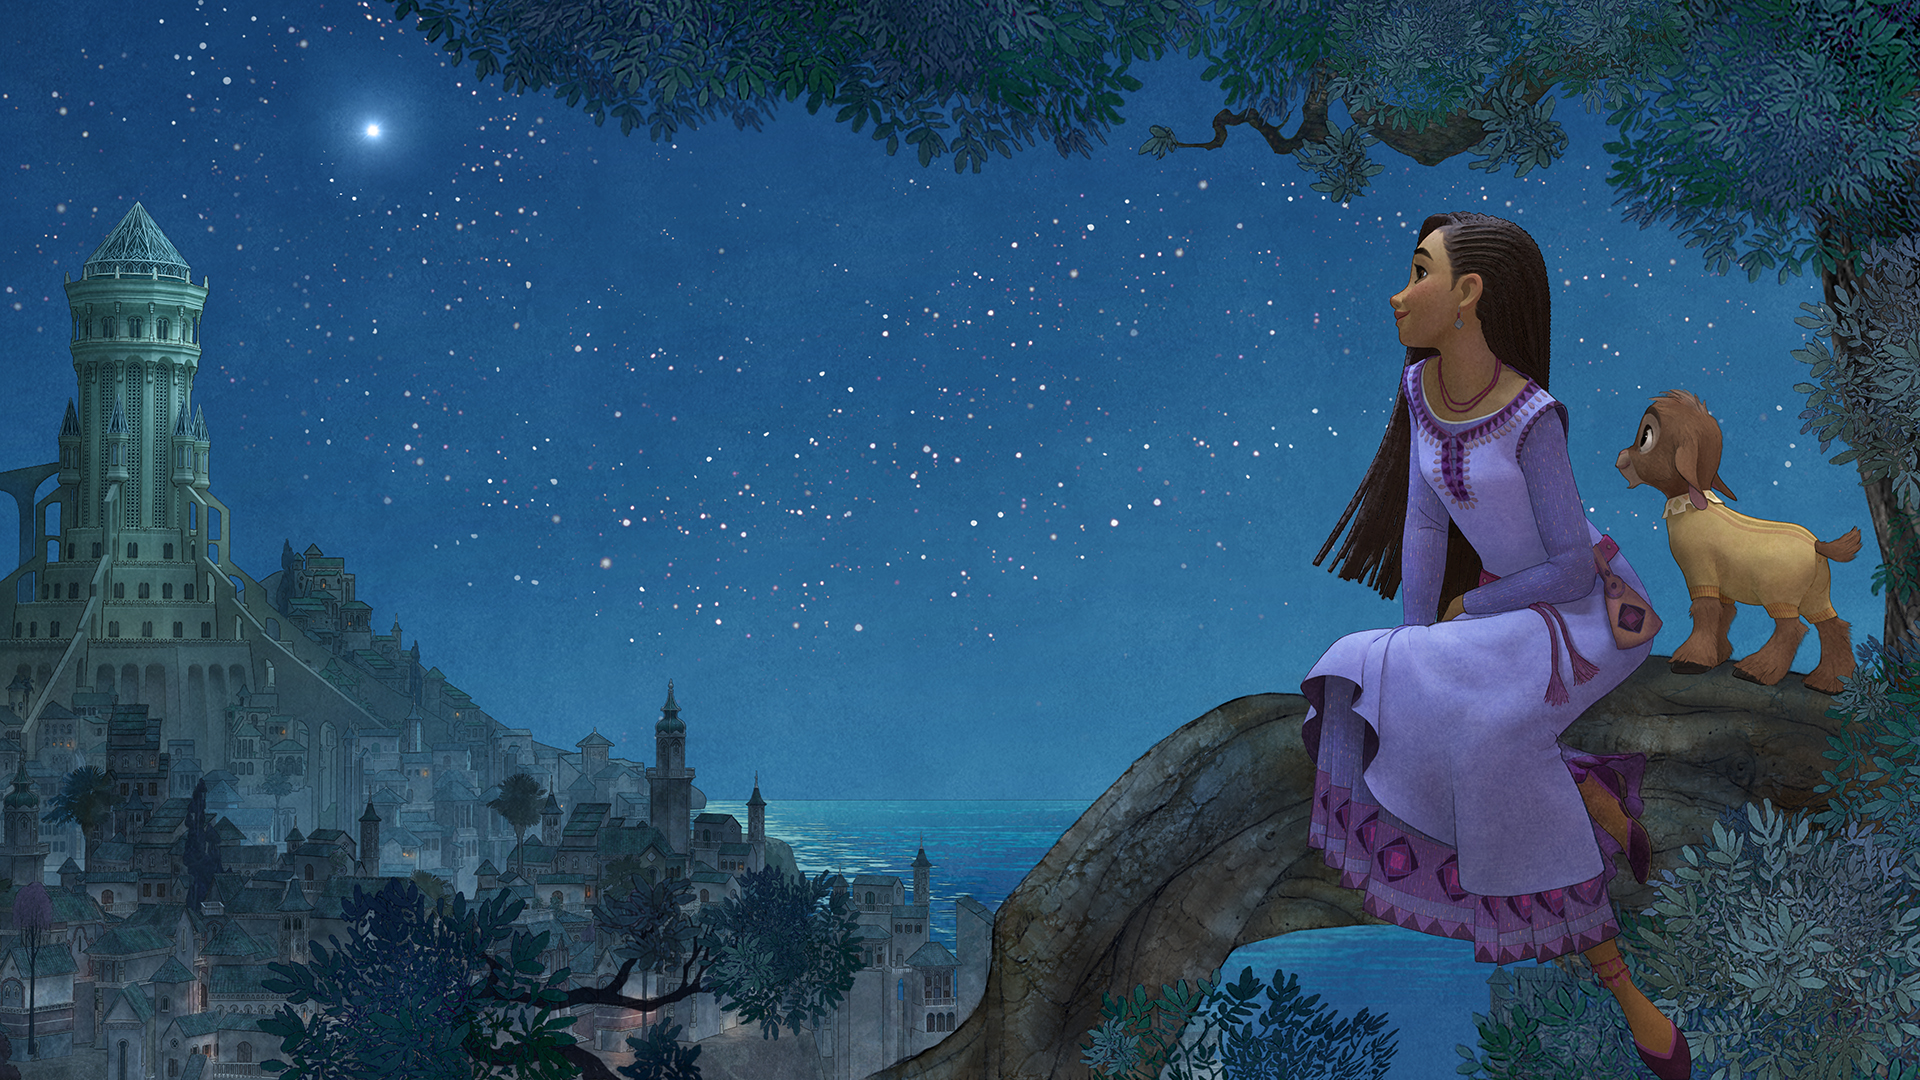 a tan-skinned girl sits on the brandch of a tree. she wears a purple dress, long dark hair over one shoulder. next to her is a small goat in a onesie, they look out at a beautiful night sky over a city next to water